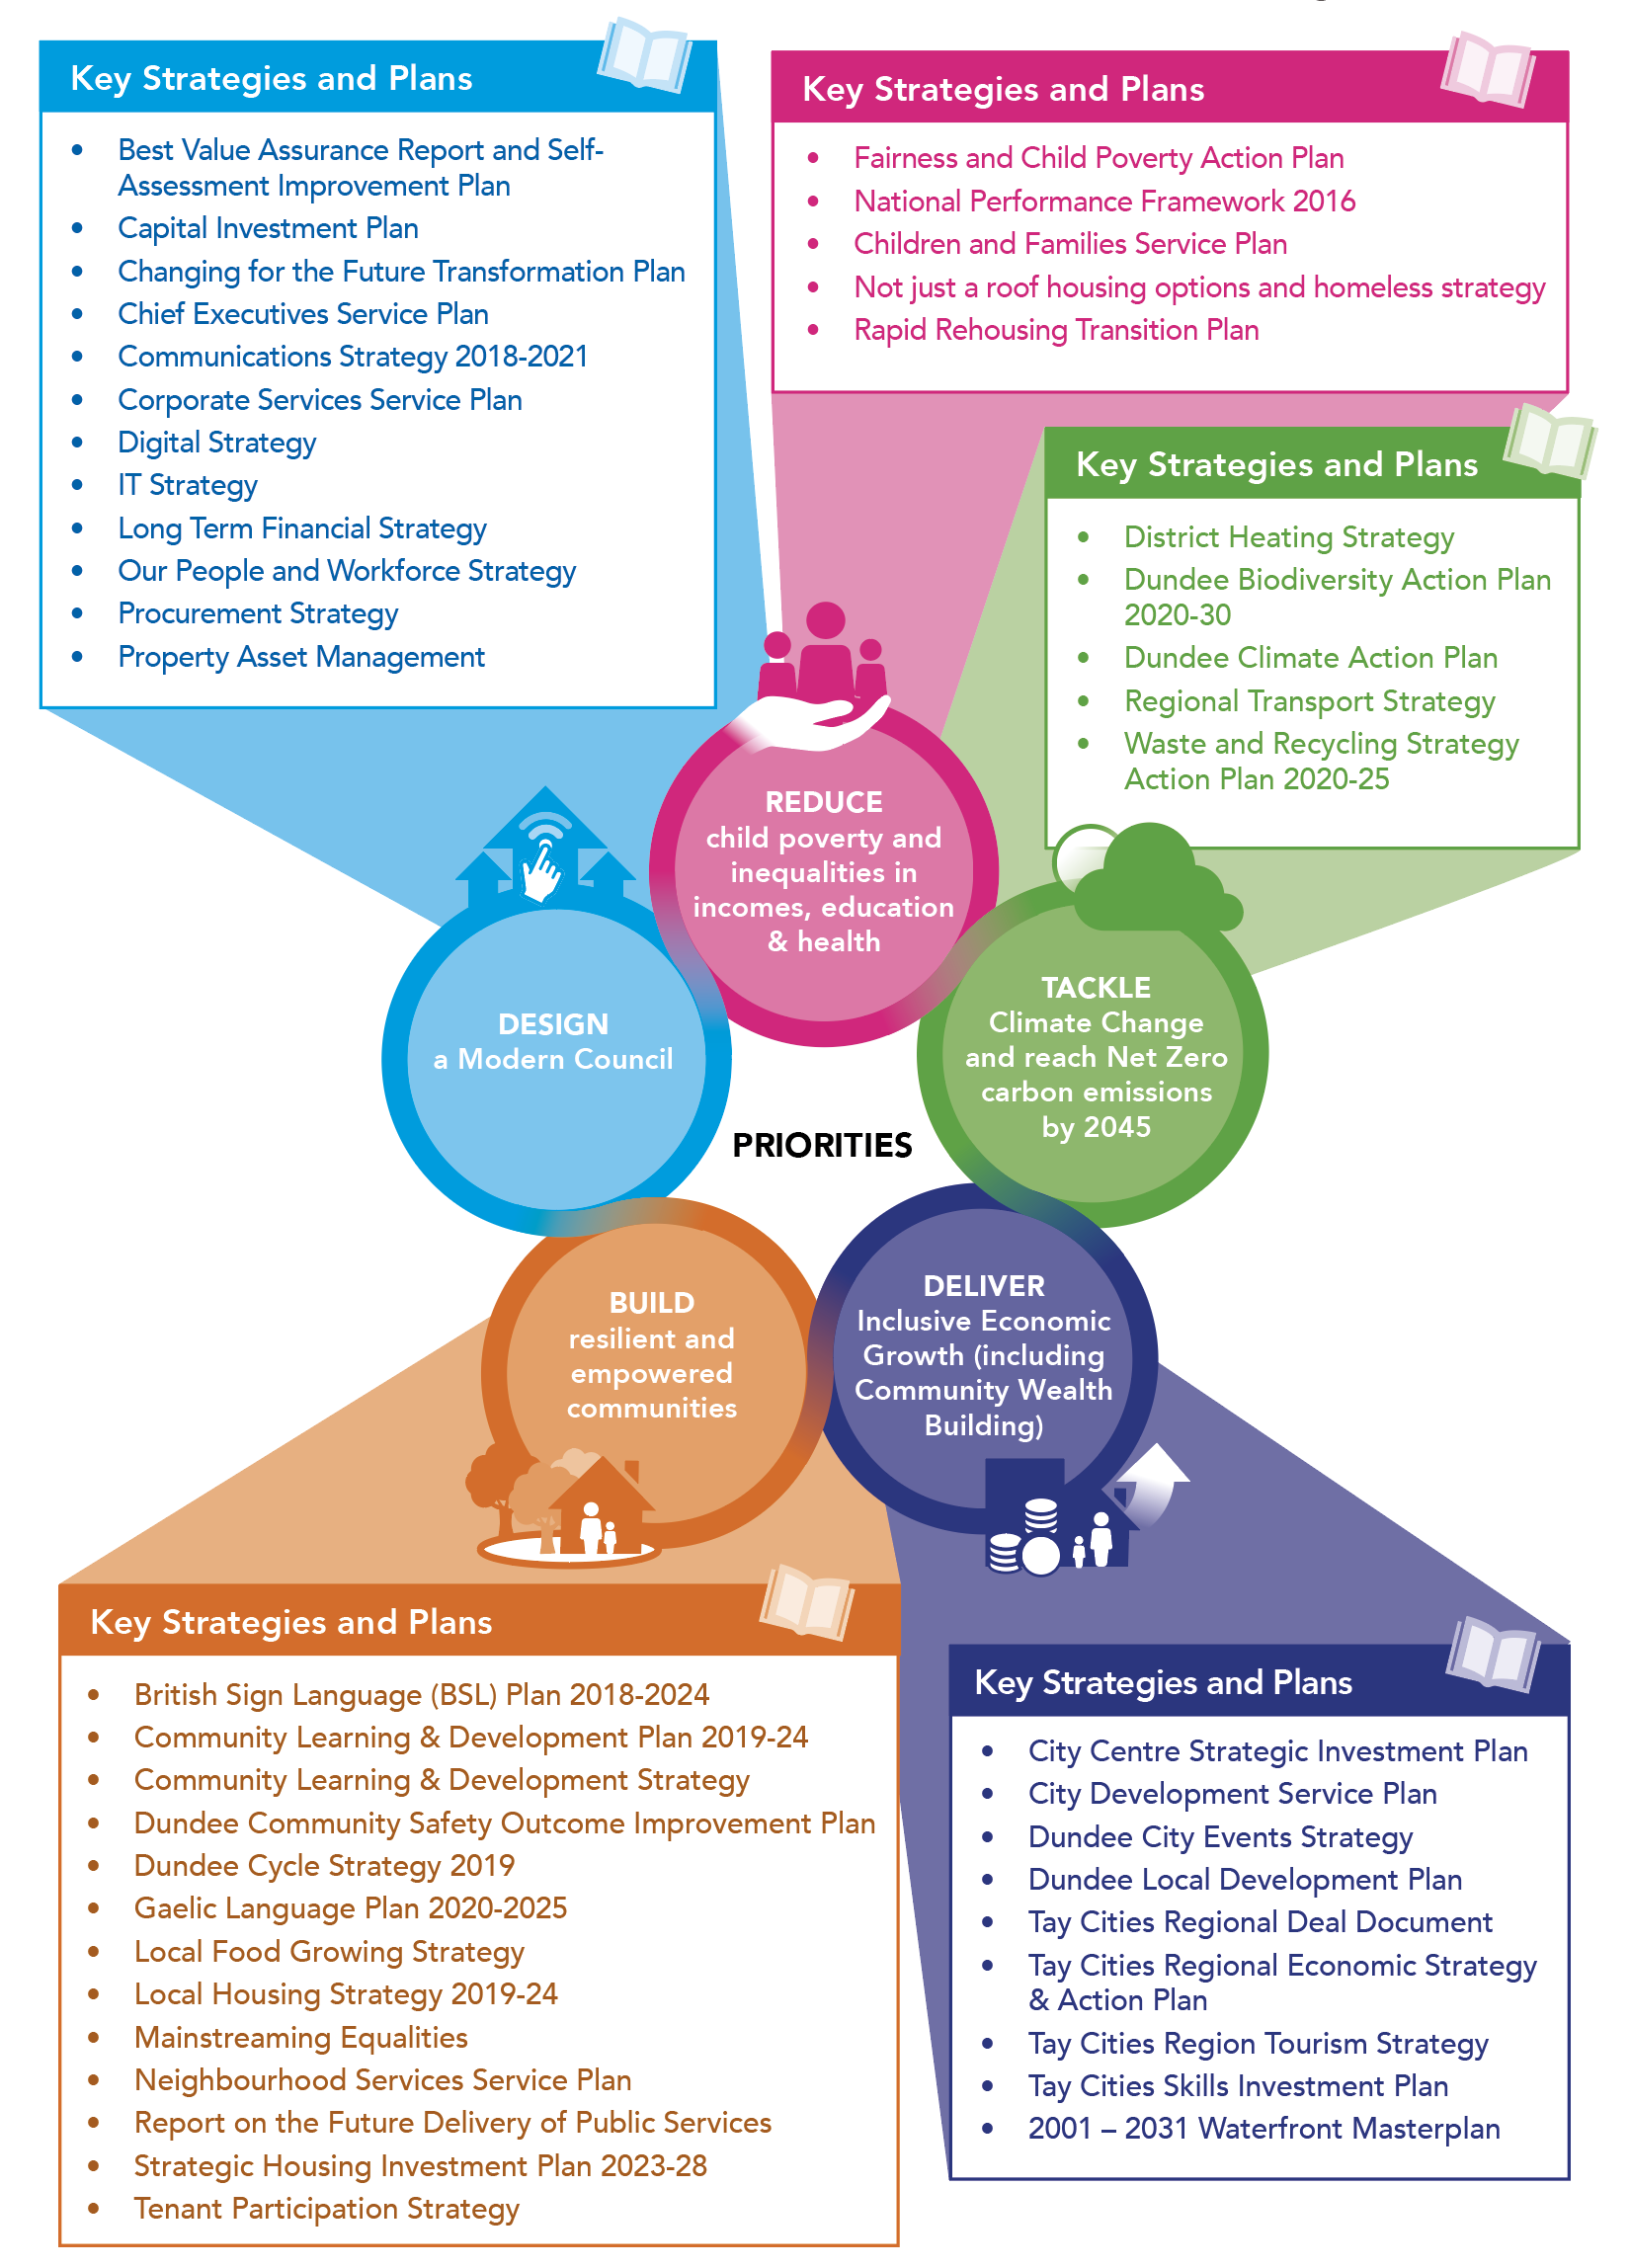 The image shows the strategic priorities and main strategic documents that the  Council Plan 2022-27 builds on and connects to, and how these all fit together